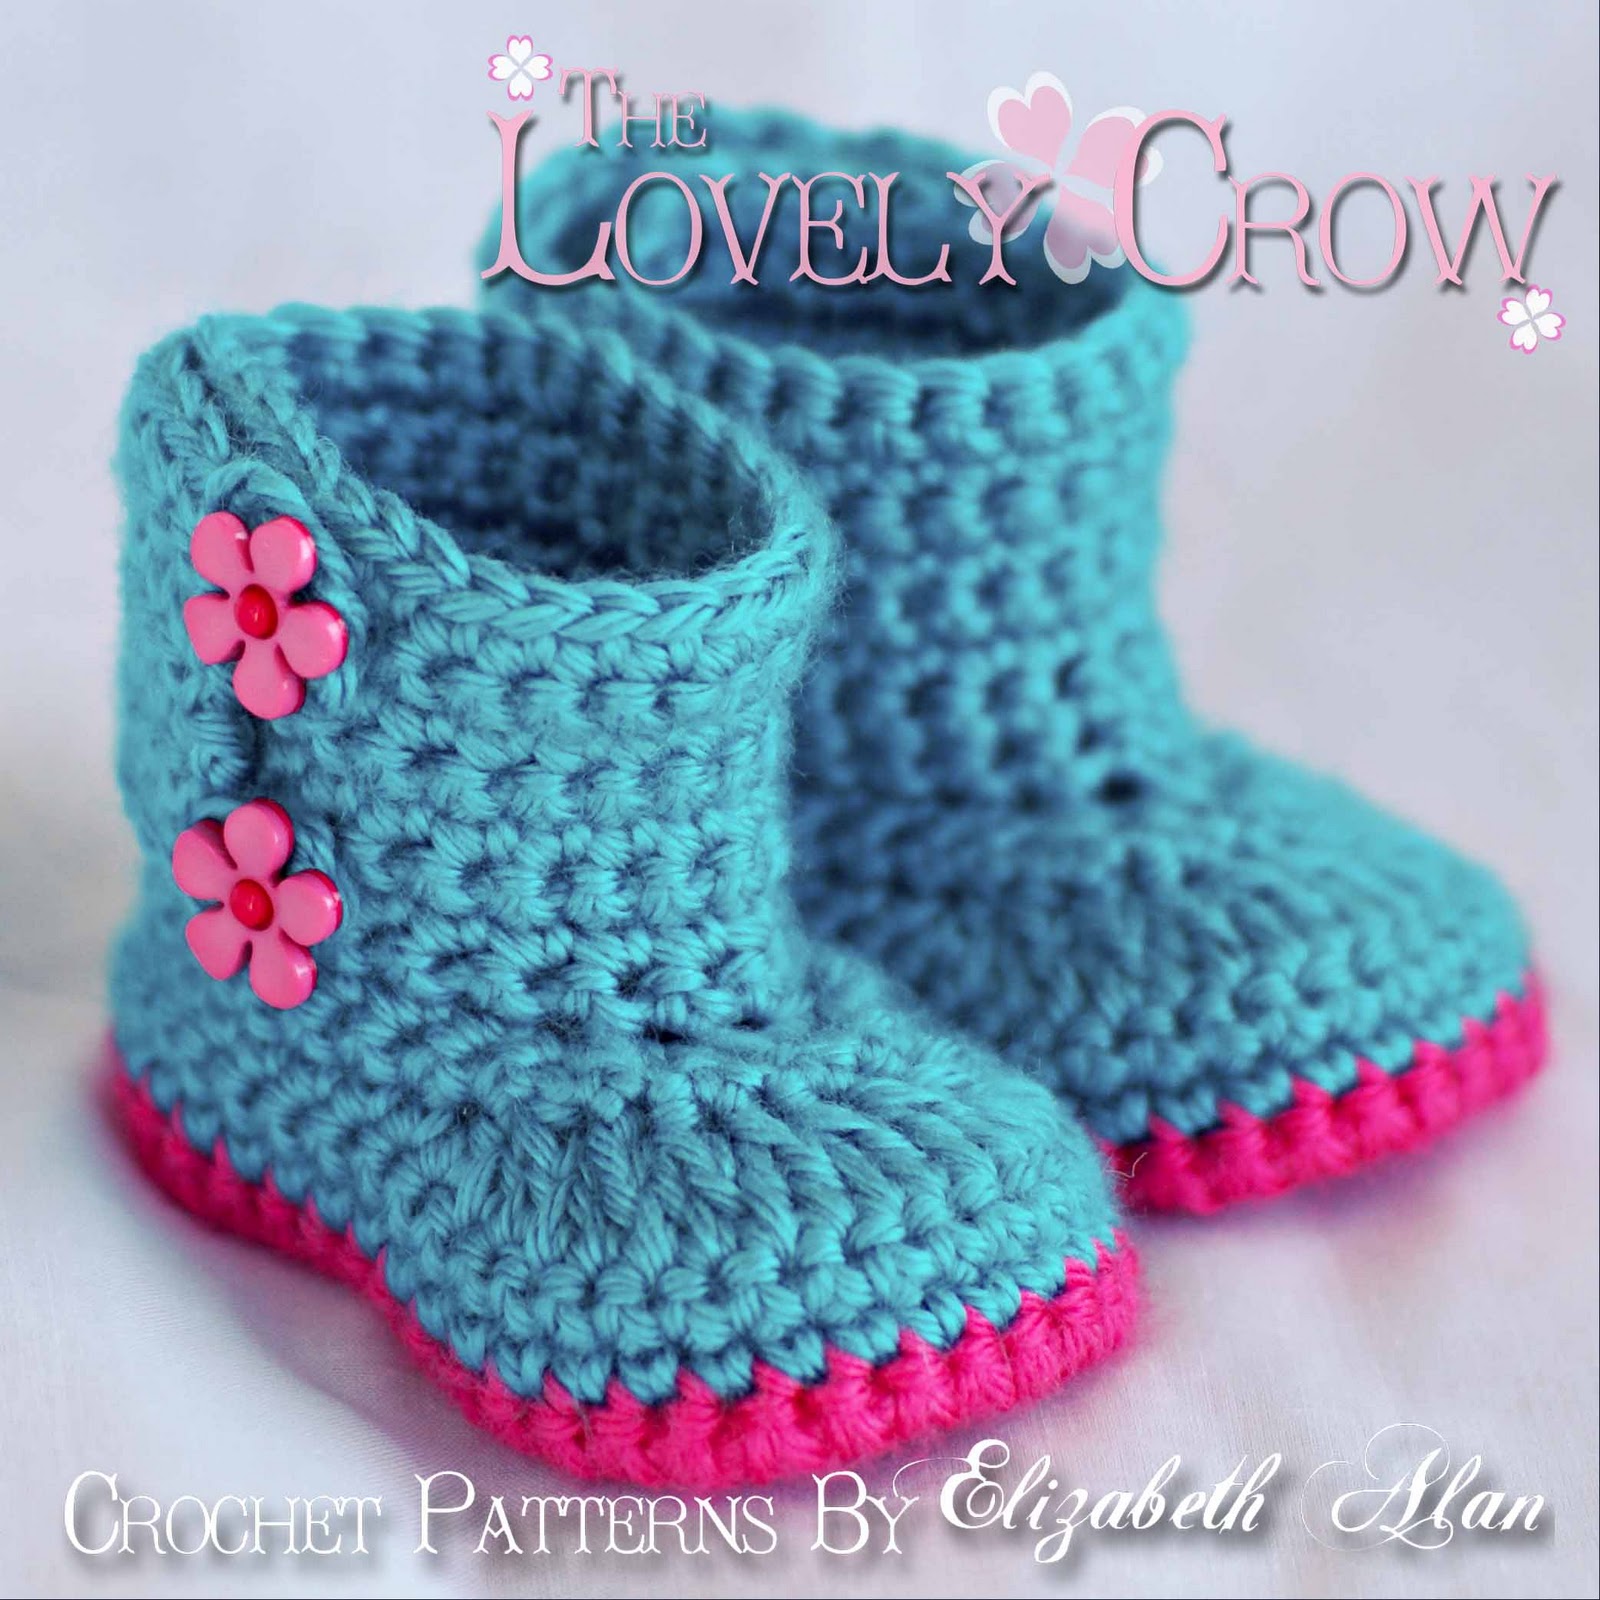 crochet patterns baby boots pattern booties doll crow lovely slipper shoes knitting